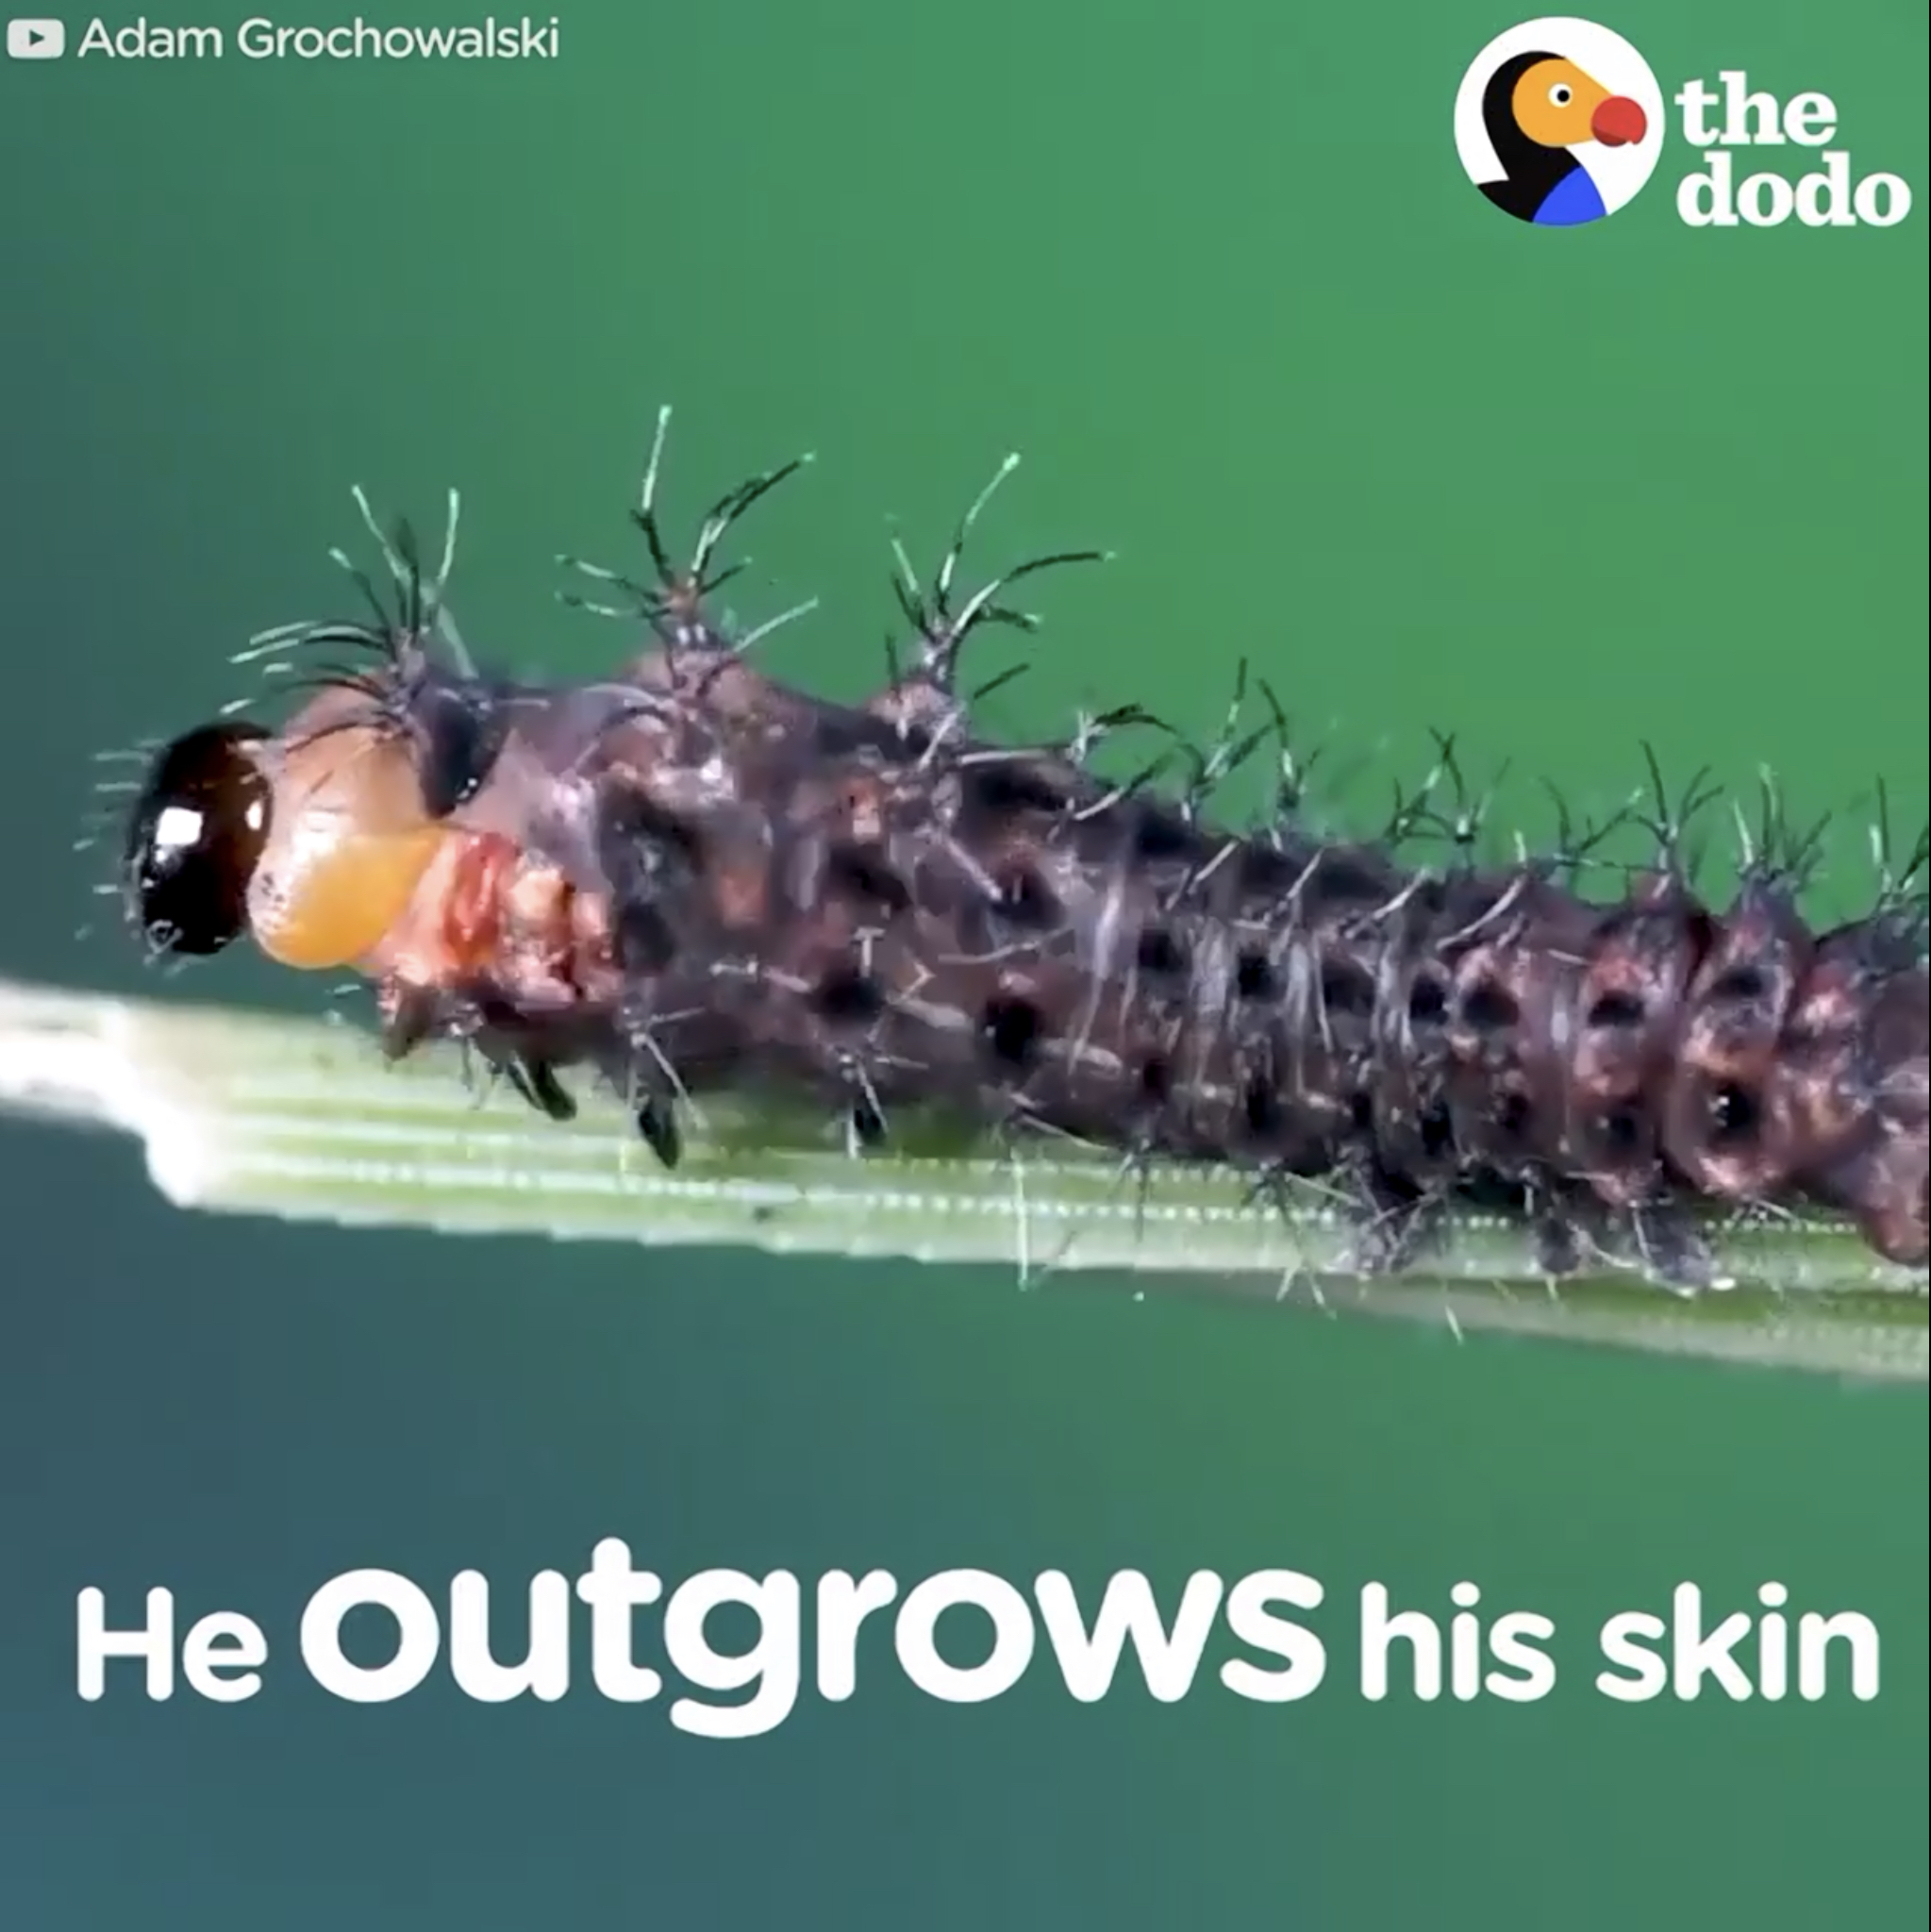 The caterpillar, or what is more scientifically termed a larva, stuffs itself with leaves, growing plumper and longer through a series of molts in which it sheds its skin.